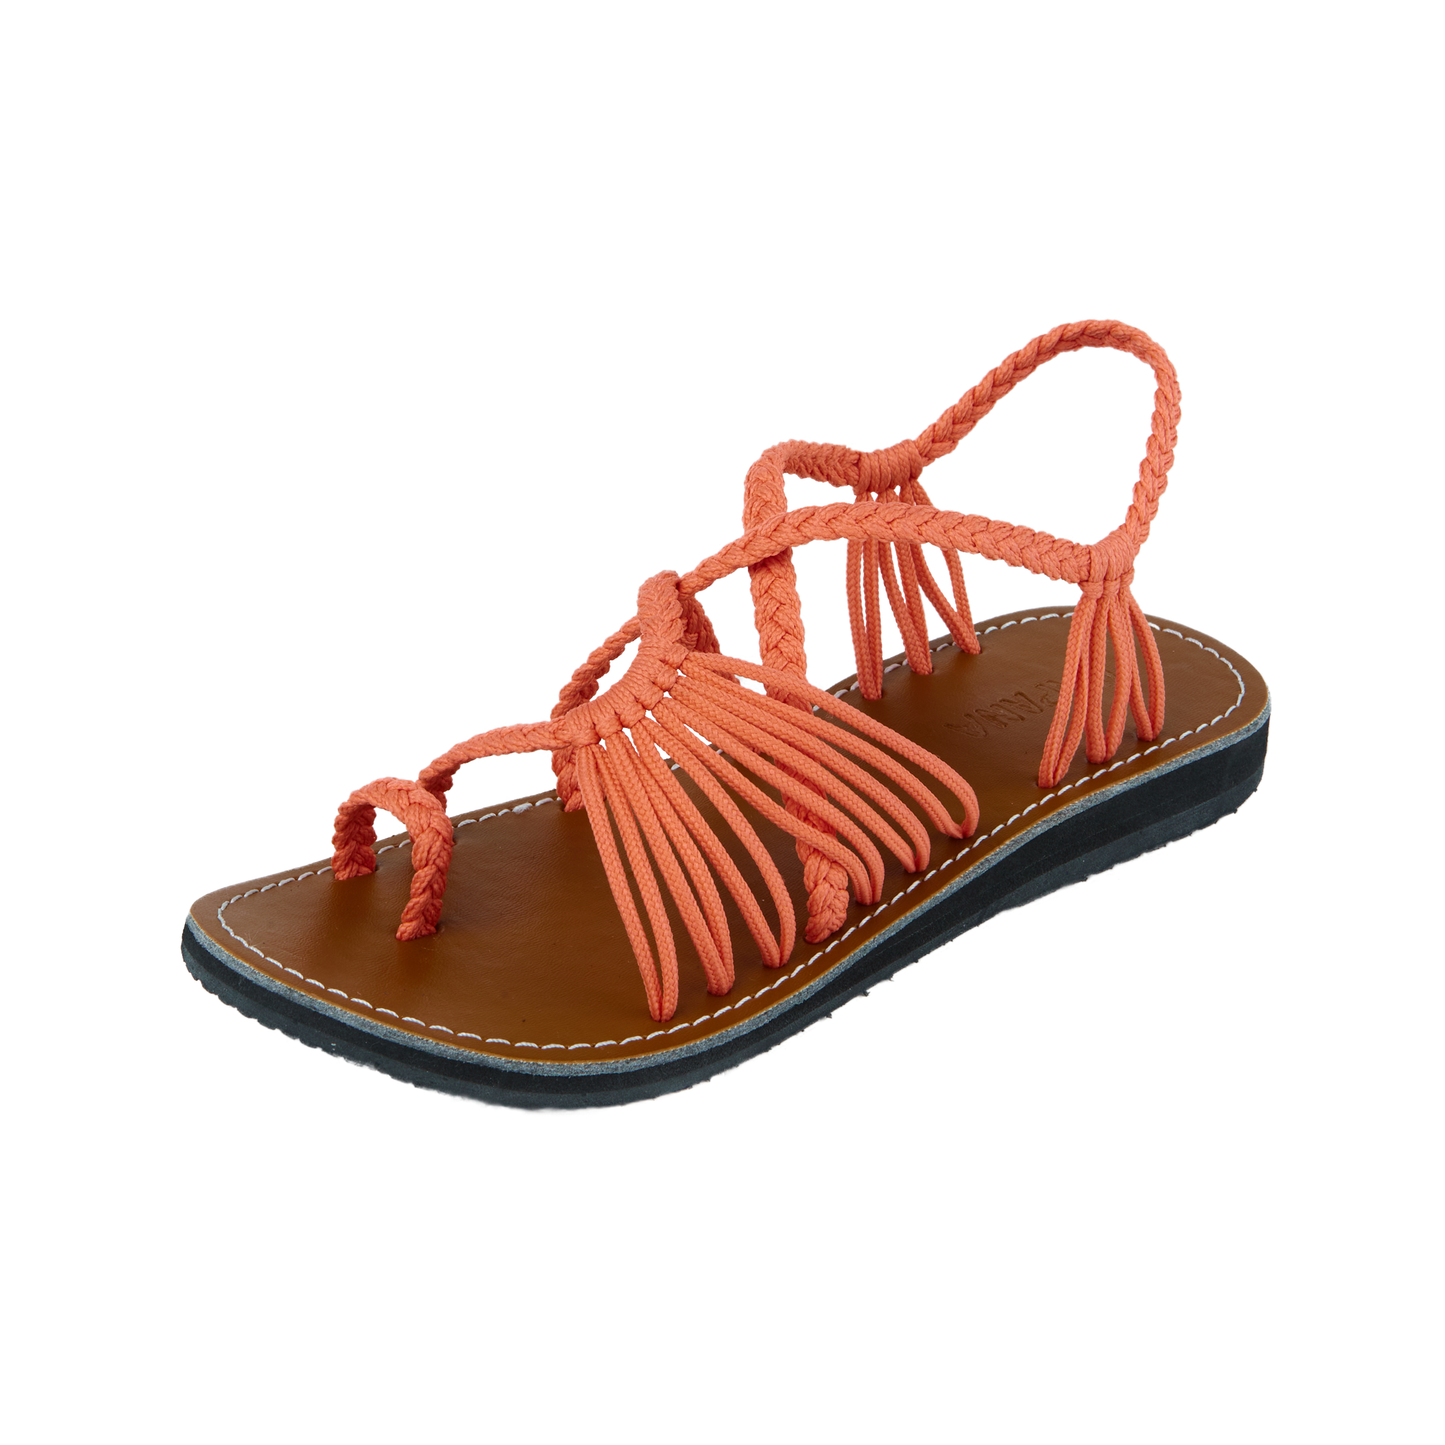 Hand woven sandals Salmon on model